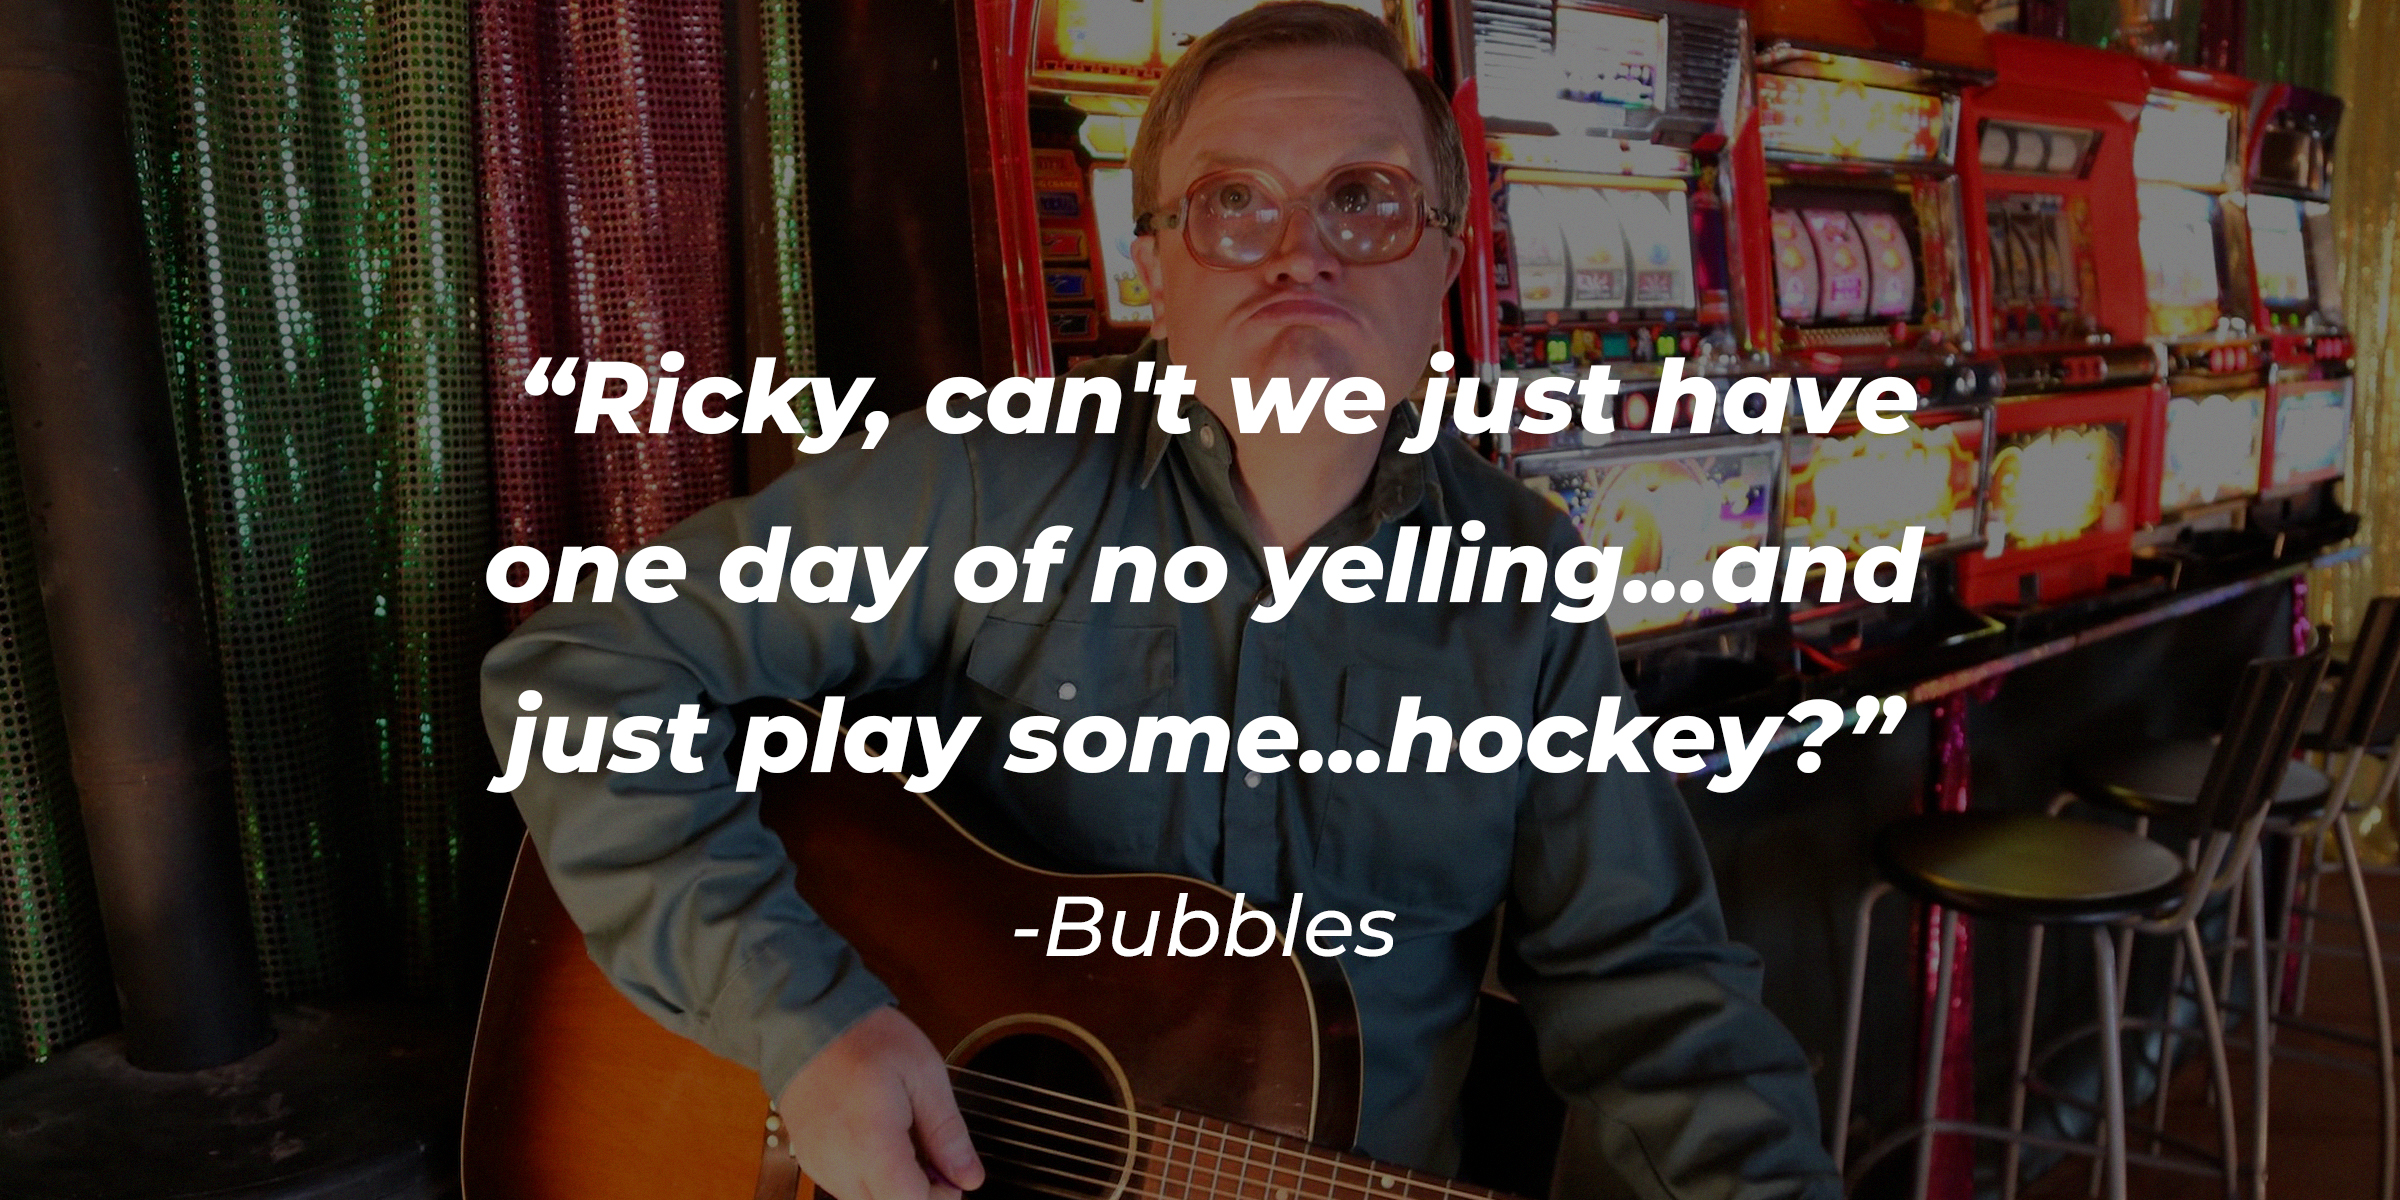 A photo of Bubbles with Bubbles's quote: “Ricky, can't we just have one day of no yelling...and just play some...hockey?” | Source: facebook.com/trailerparkboys